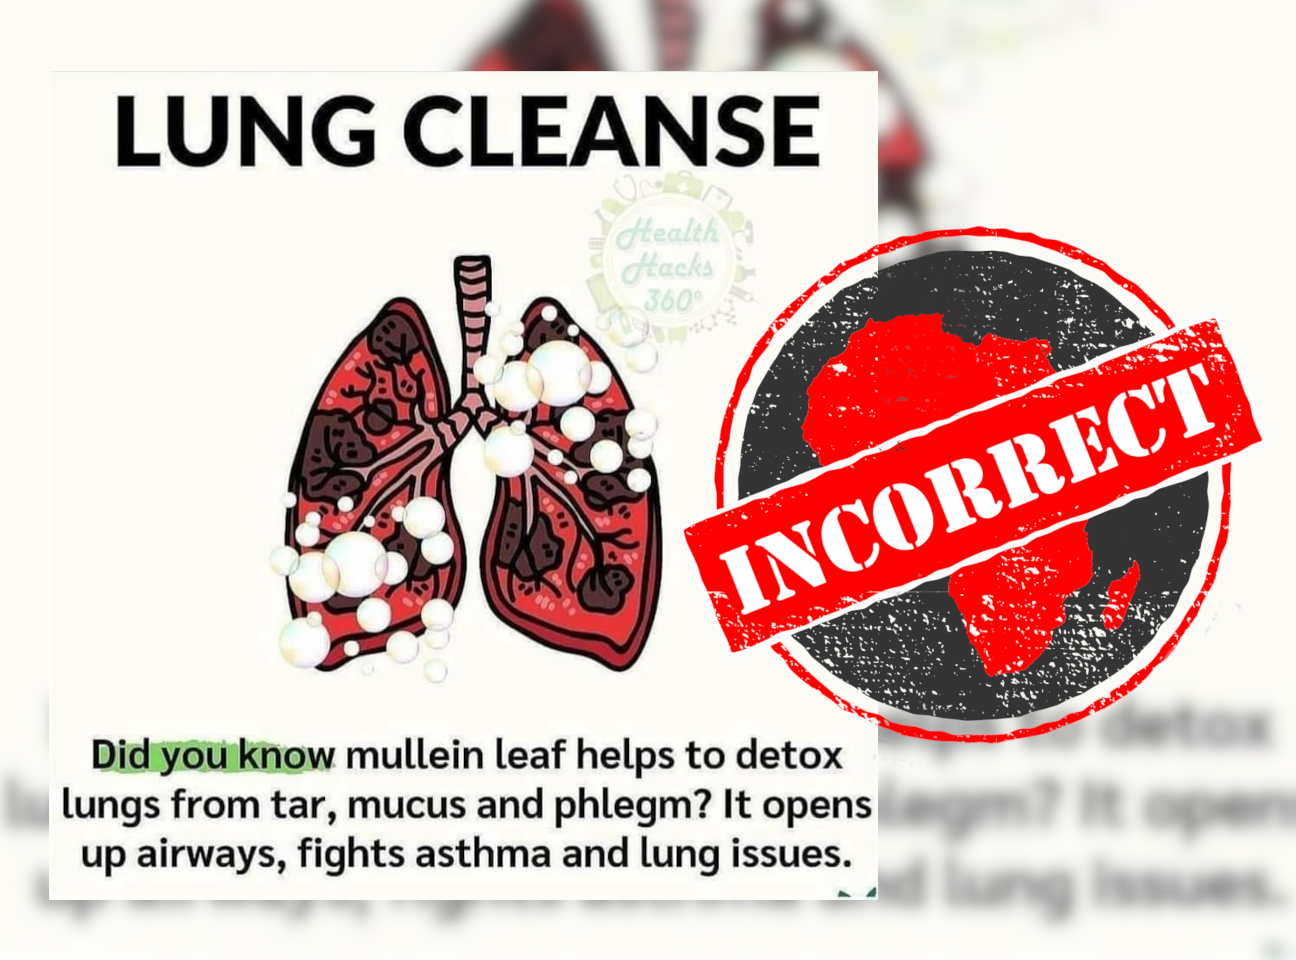 LungCleanse_Incorrect